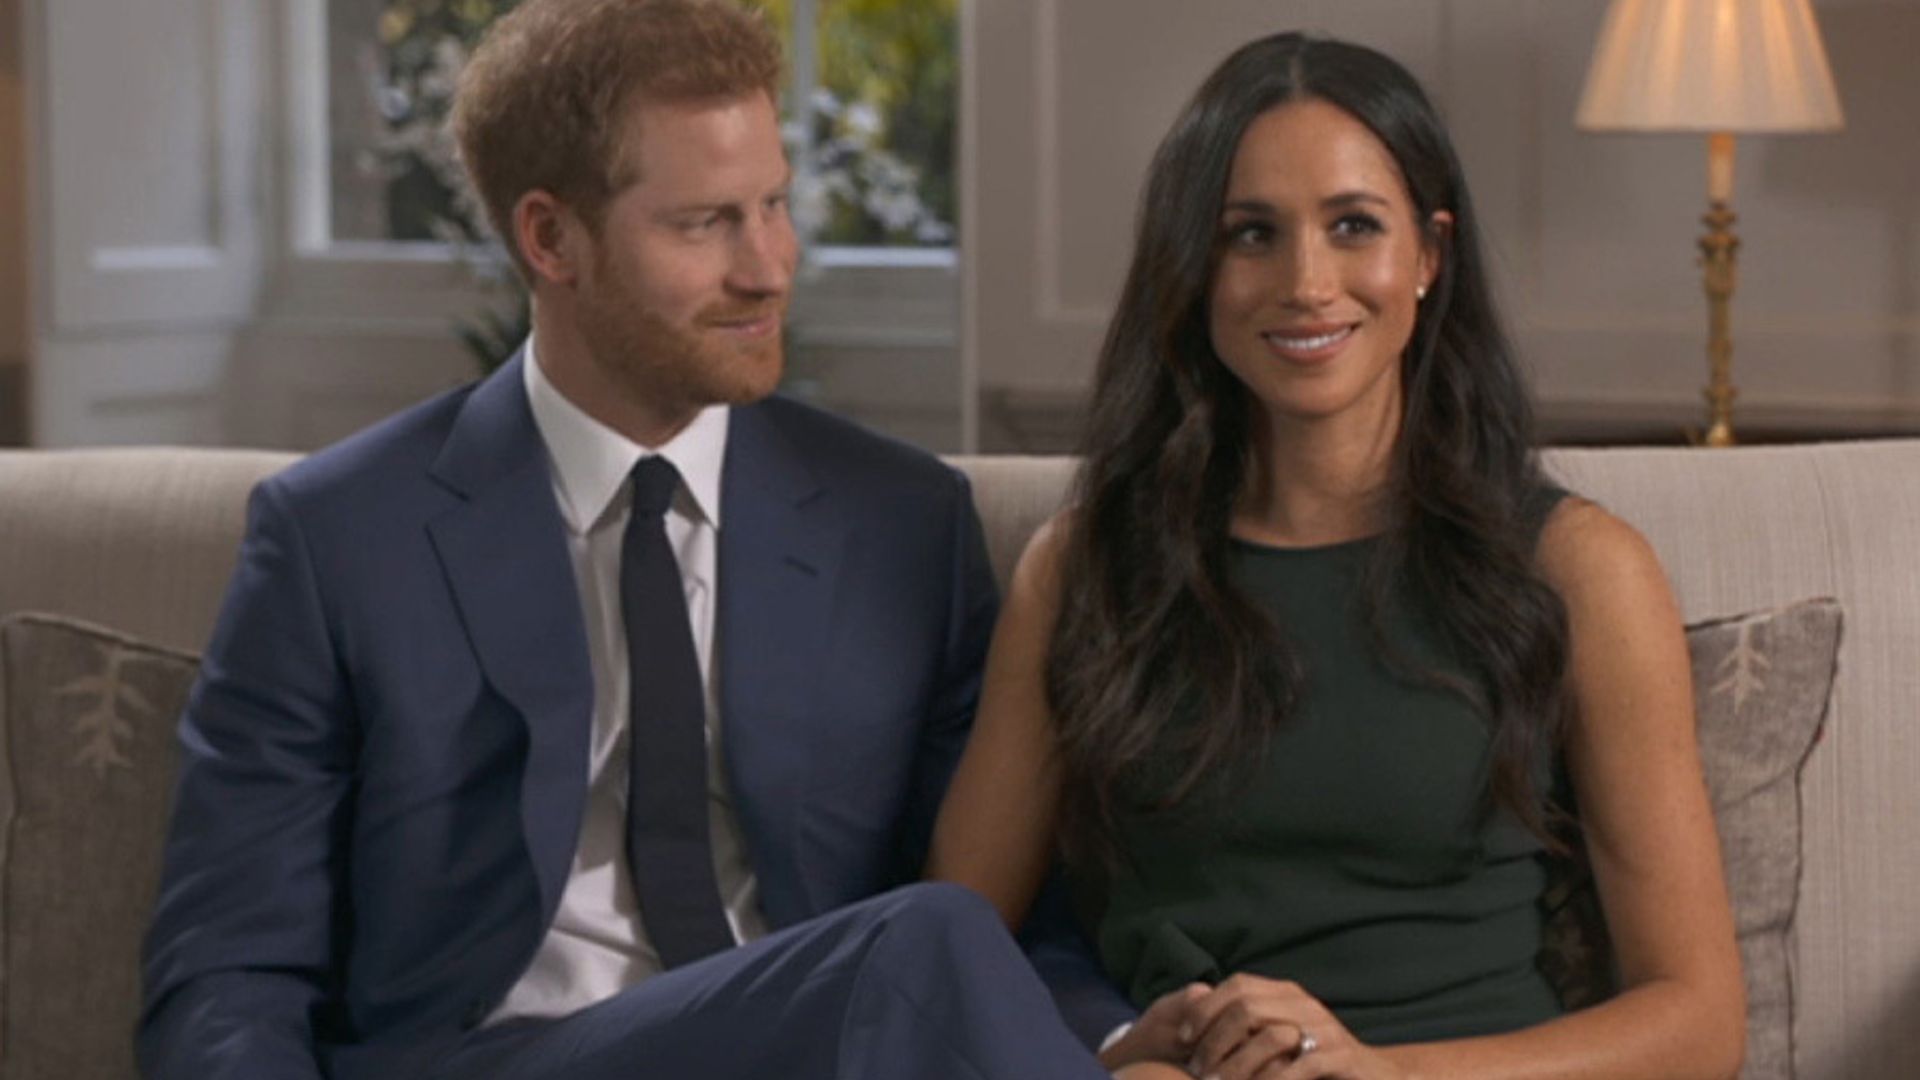 Prince Harry and Meghan Markle's first interview touches on Princess Diana, meeting Kate Middleton and the Queen